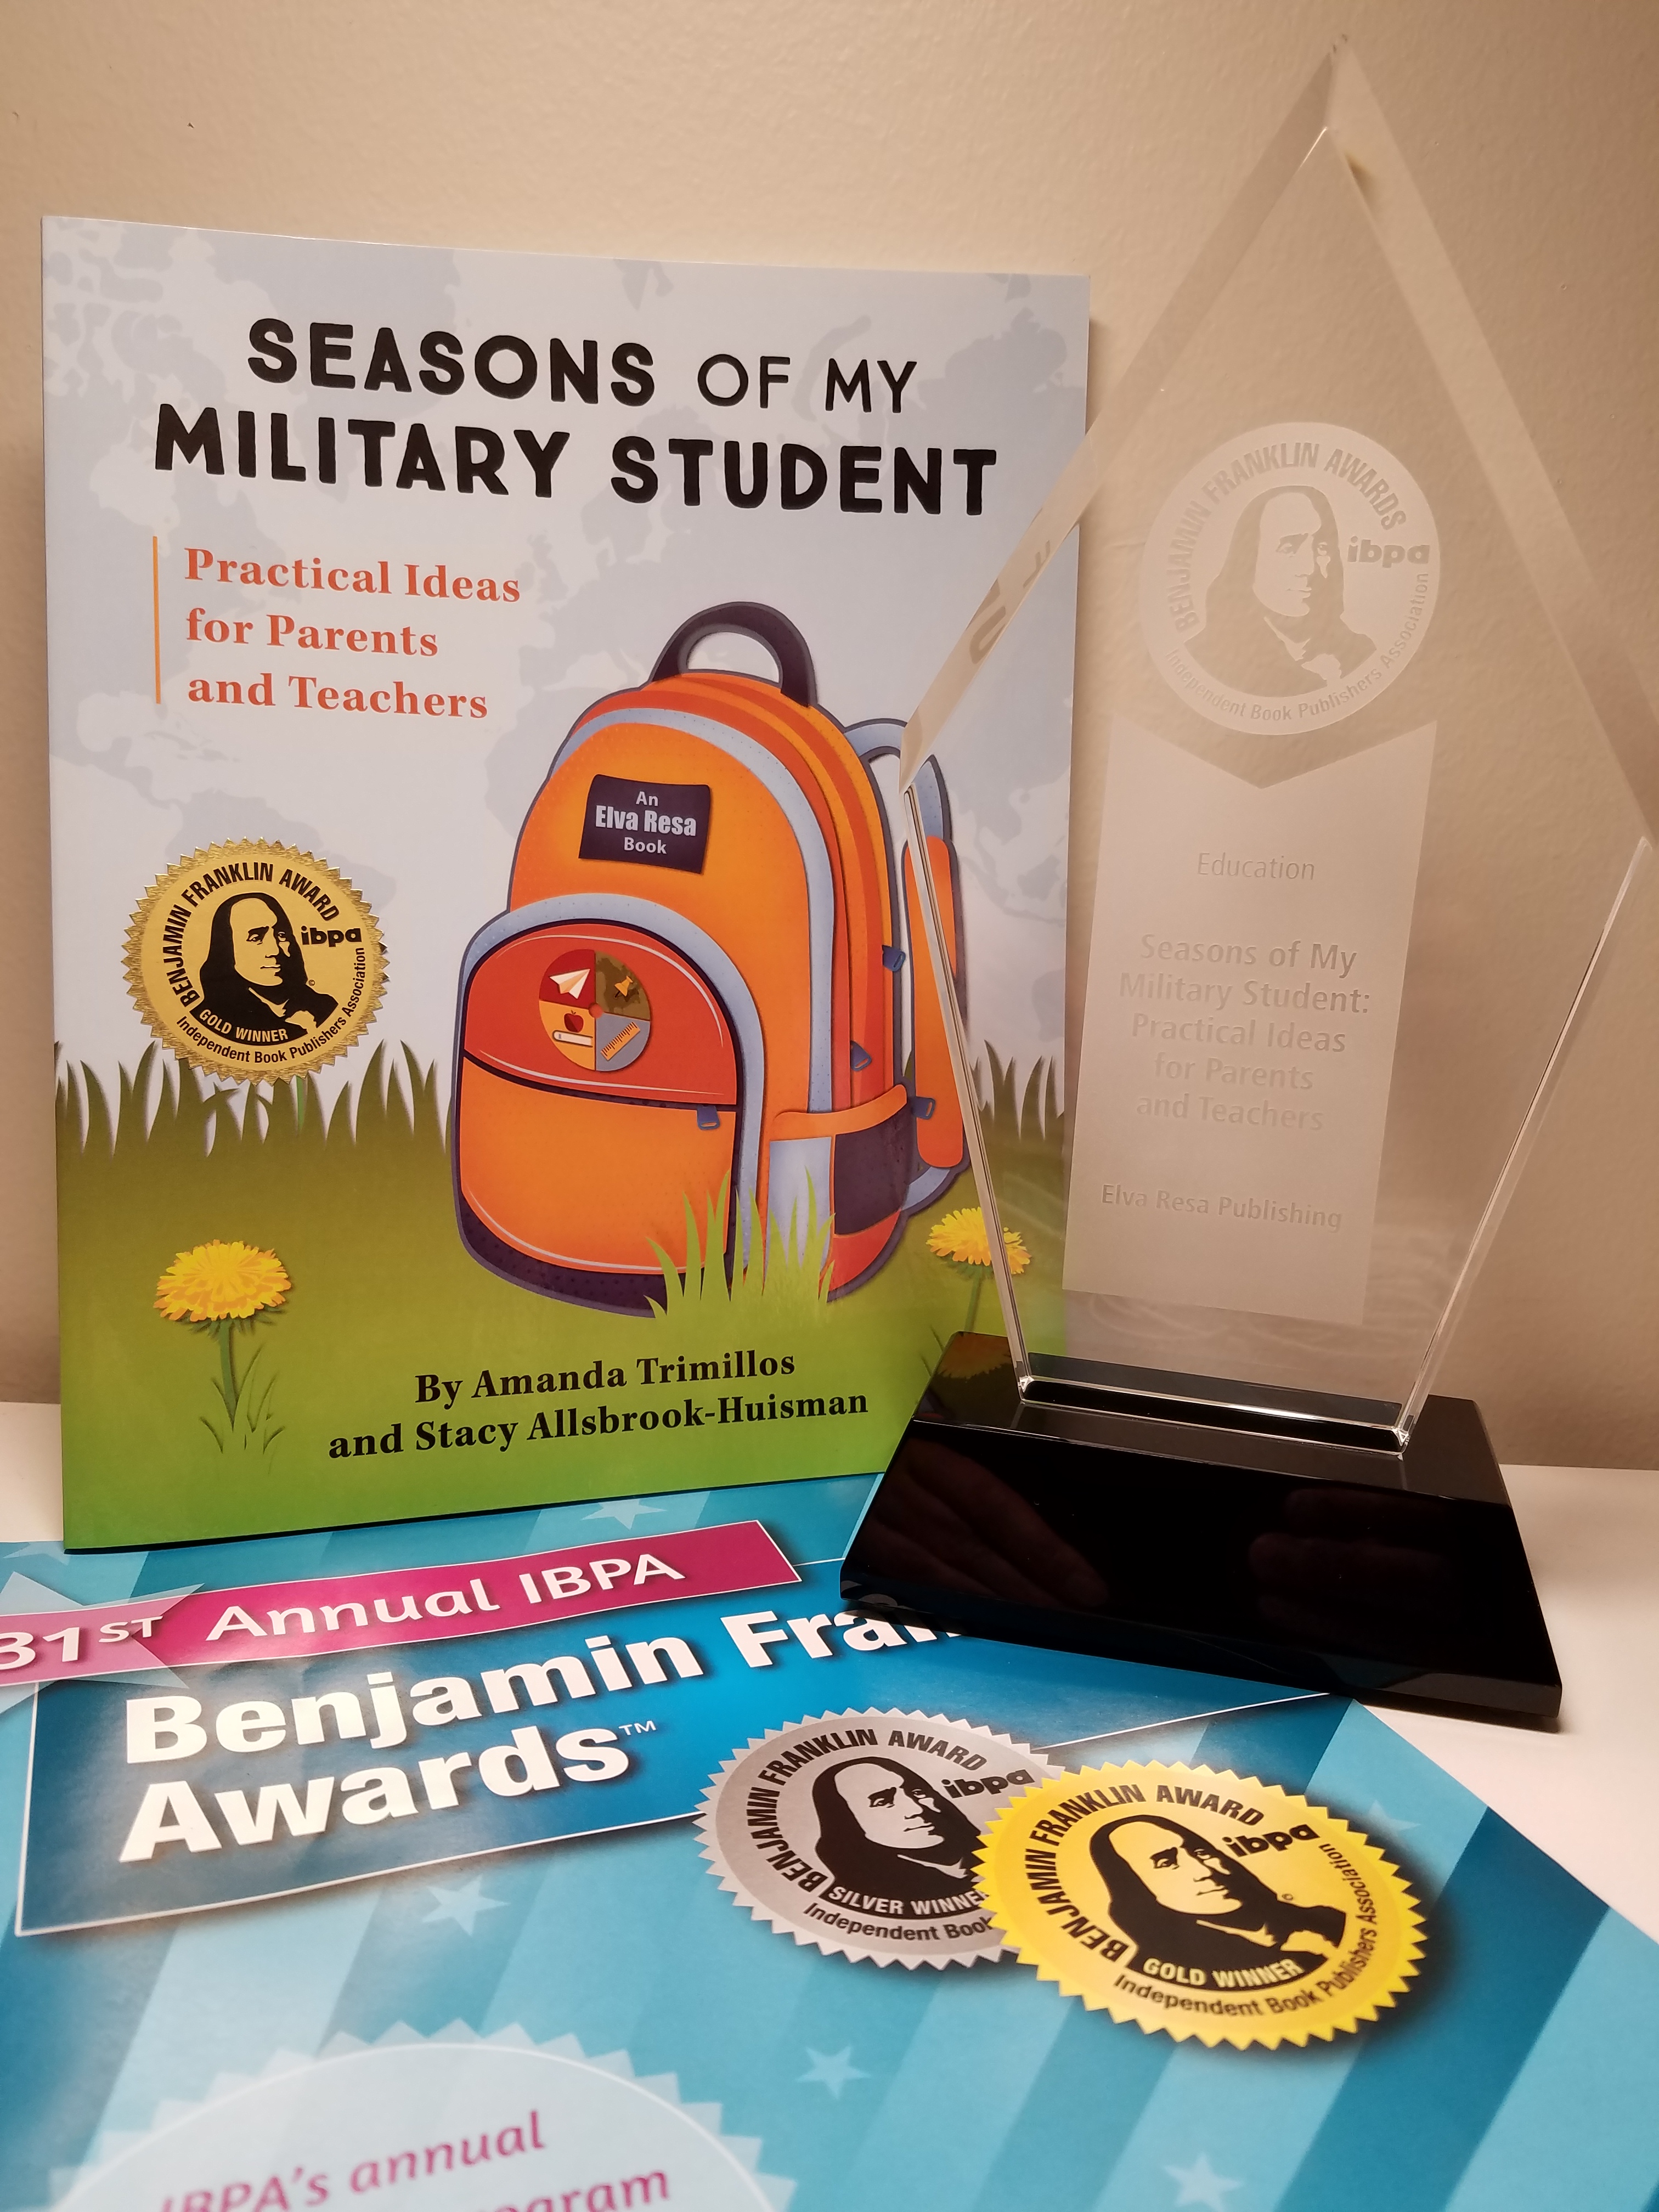 Seasons of My Military Student, an Elva Resa book, won the gold in the education category in the 2019 IBPA Benjamin Franklin Awards